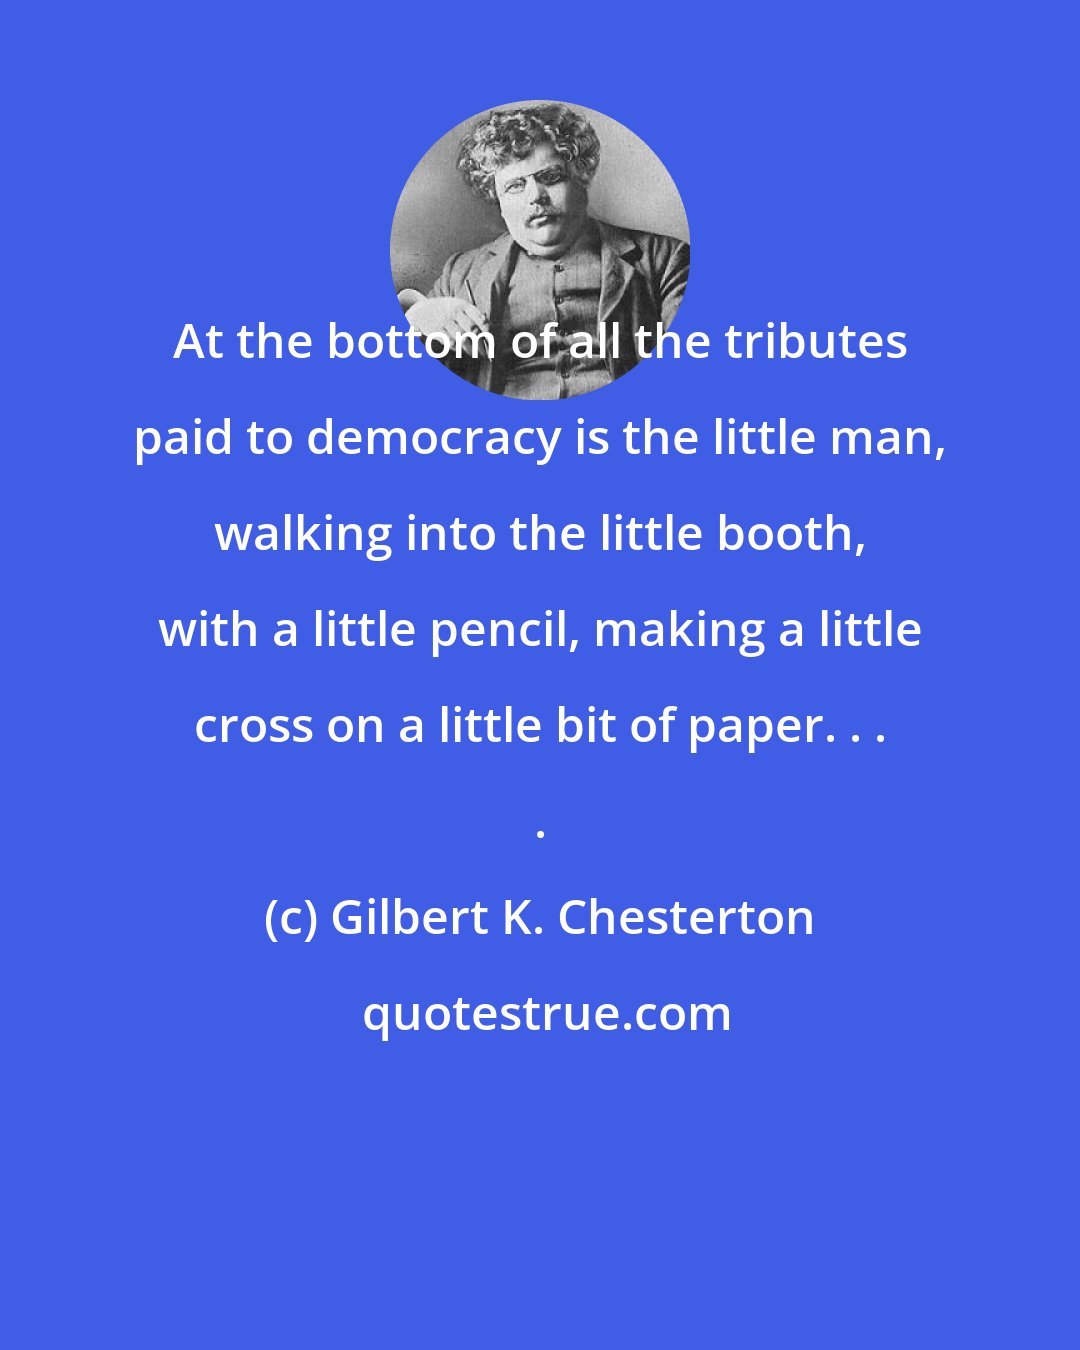 Gilbert K. Chesterton: At the bottom of all the tributes paid to democracy is the little man, walking into the little booth, with a little pencil, making a little cross on a little bit of paper. . . .